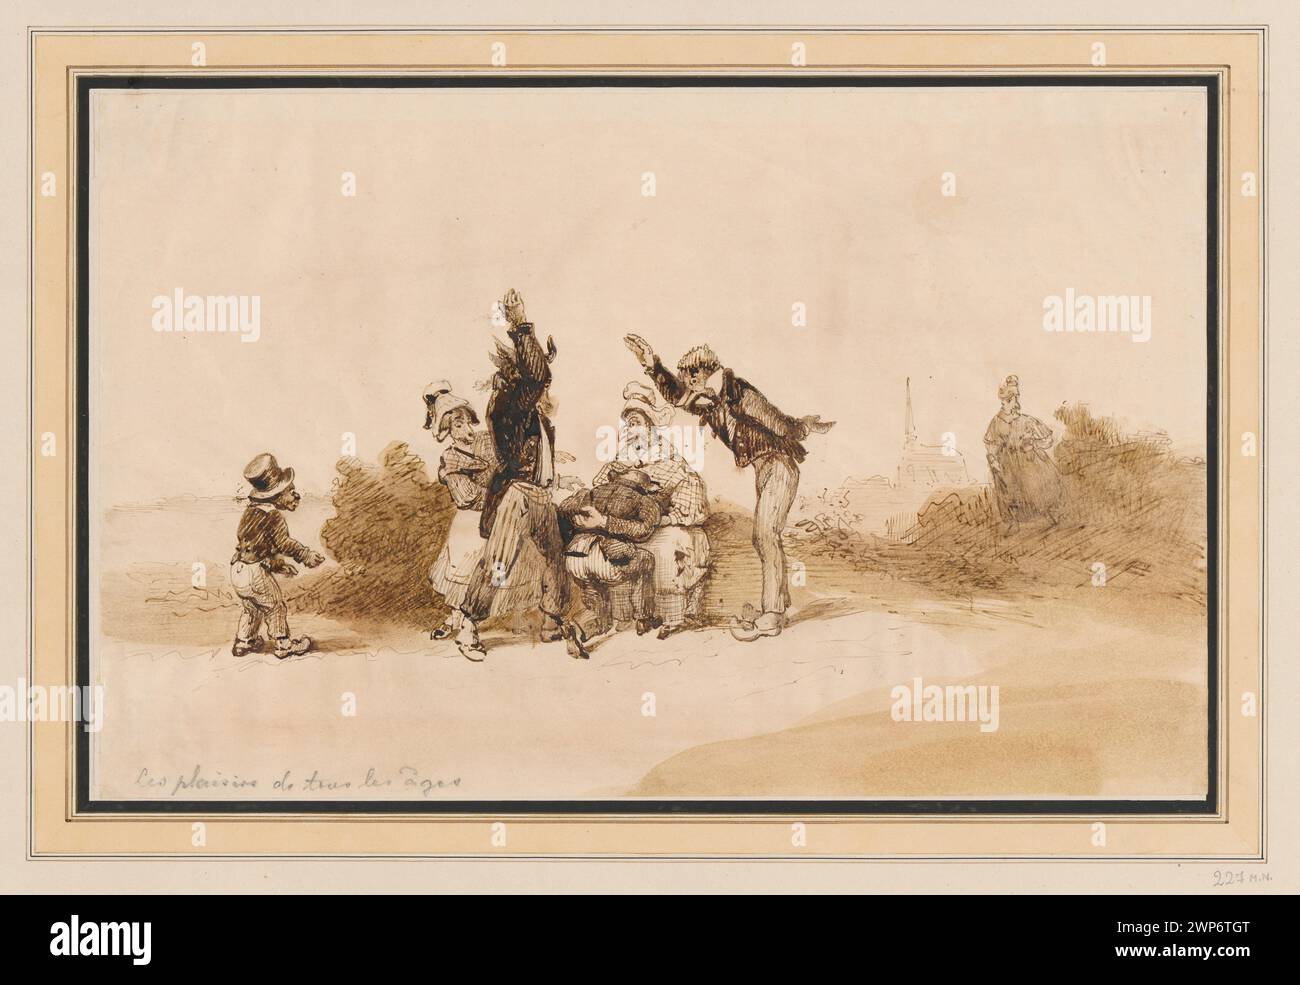 Play in Main Chaude; Grandville, Jean-Jacques (1803-1847); before 1827 (1801-00-00-1900-00-00);Bloch, Jan Gottlib (1836-1902), Bloch, Jan Gottlib (1836-1902) - collections, La Caricature (Paris - magazine - 1830-1843), Society of Encouragement of Fine Arts (Warsaw - 1860-1940) - collection, caricatures, caricatures, caricatures moral caricatures, French drawings, games, animals Stock Photo